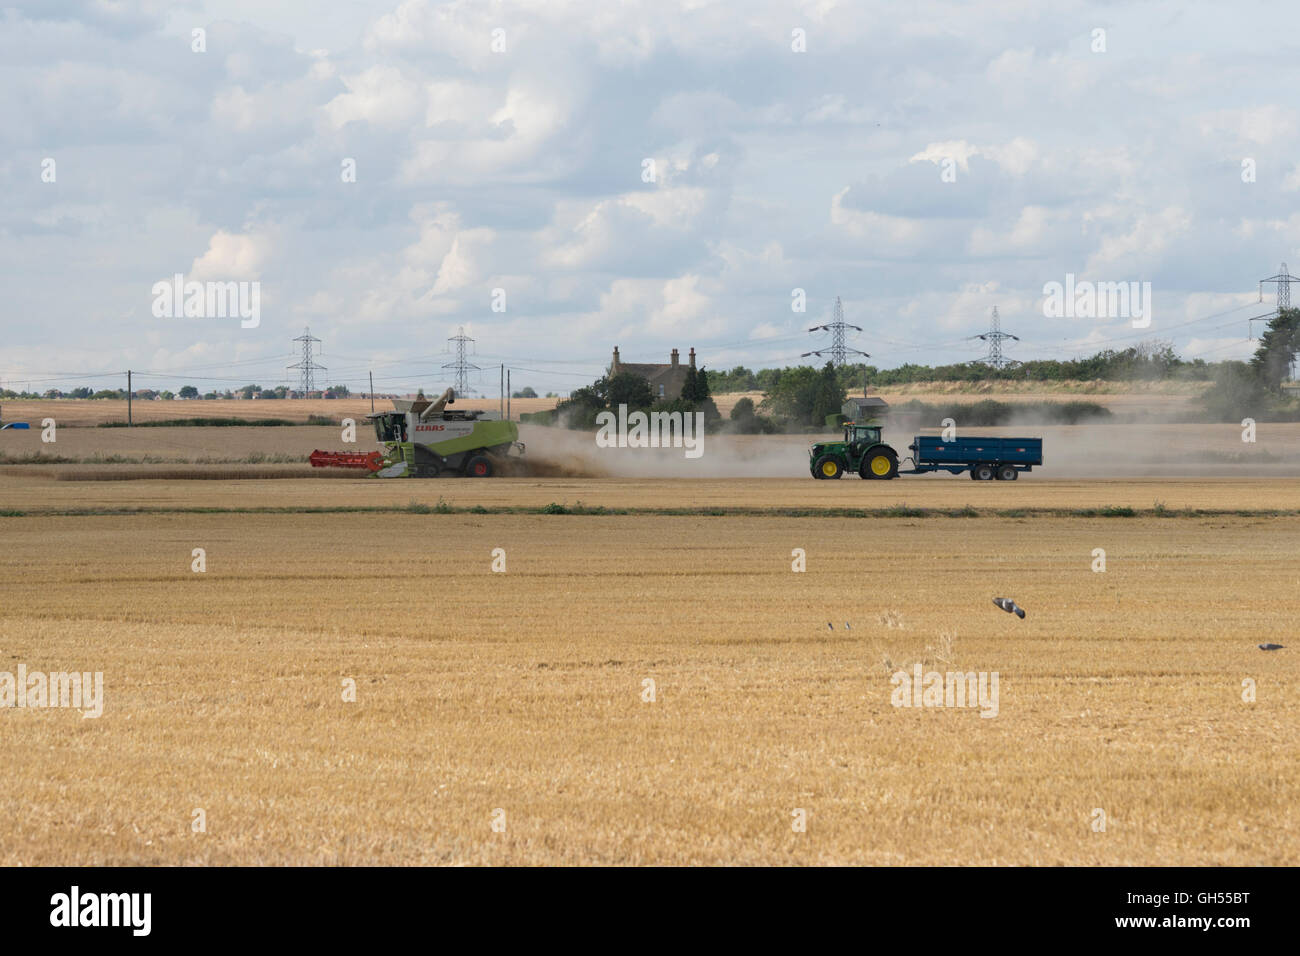 Off, loading, the, Harvester, wheat, load, onto the, awaiting, tractor, trailer, to, transport, it to the, barn or production, Stock Photo